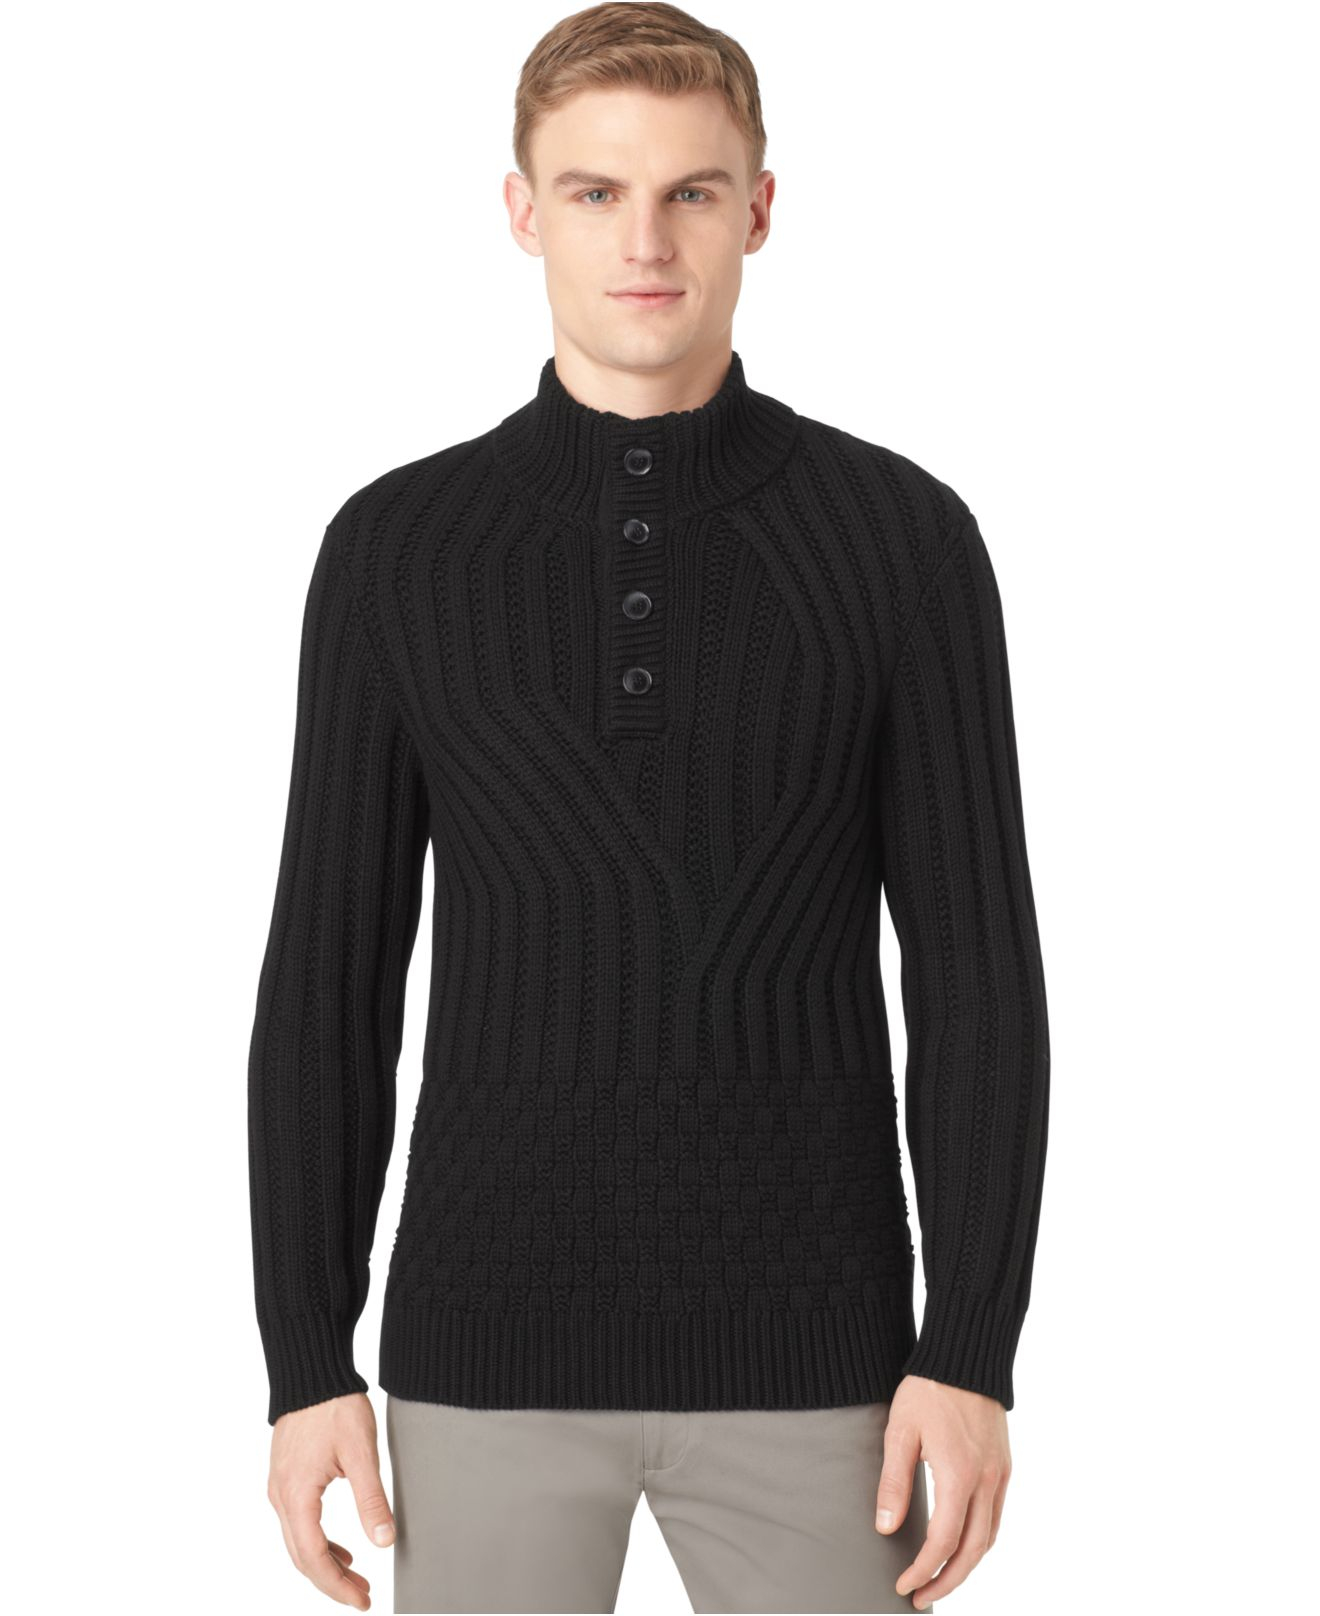 Lyst - Calvin Klein Wave And Check Knit Button Mock-Neck Sweater in ...